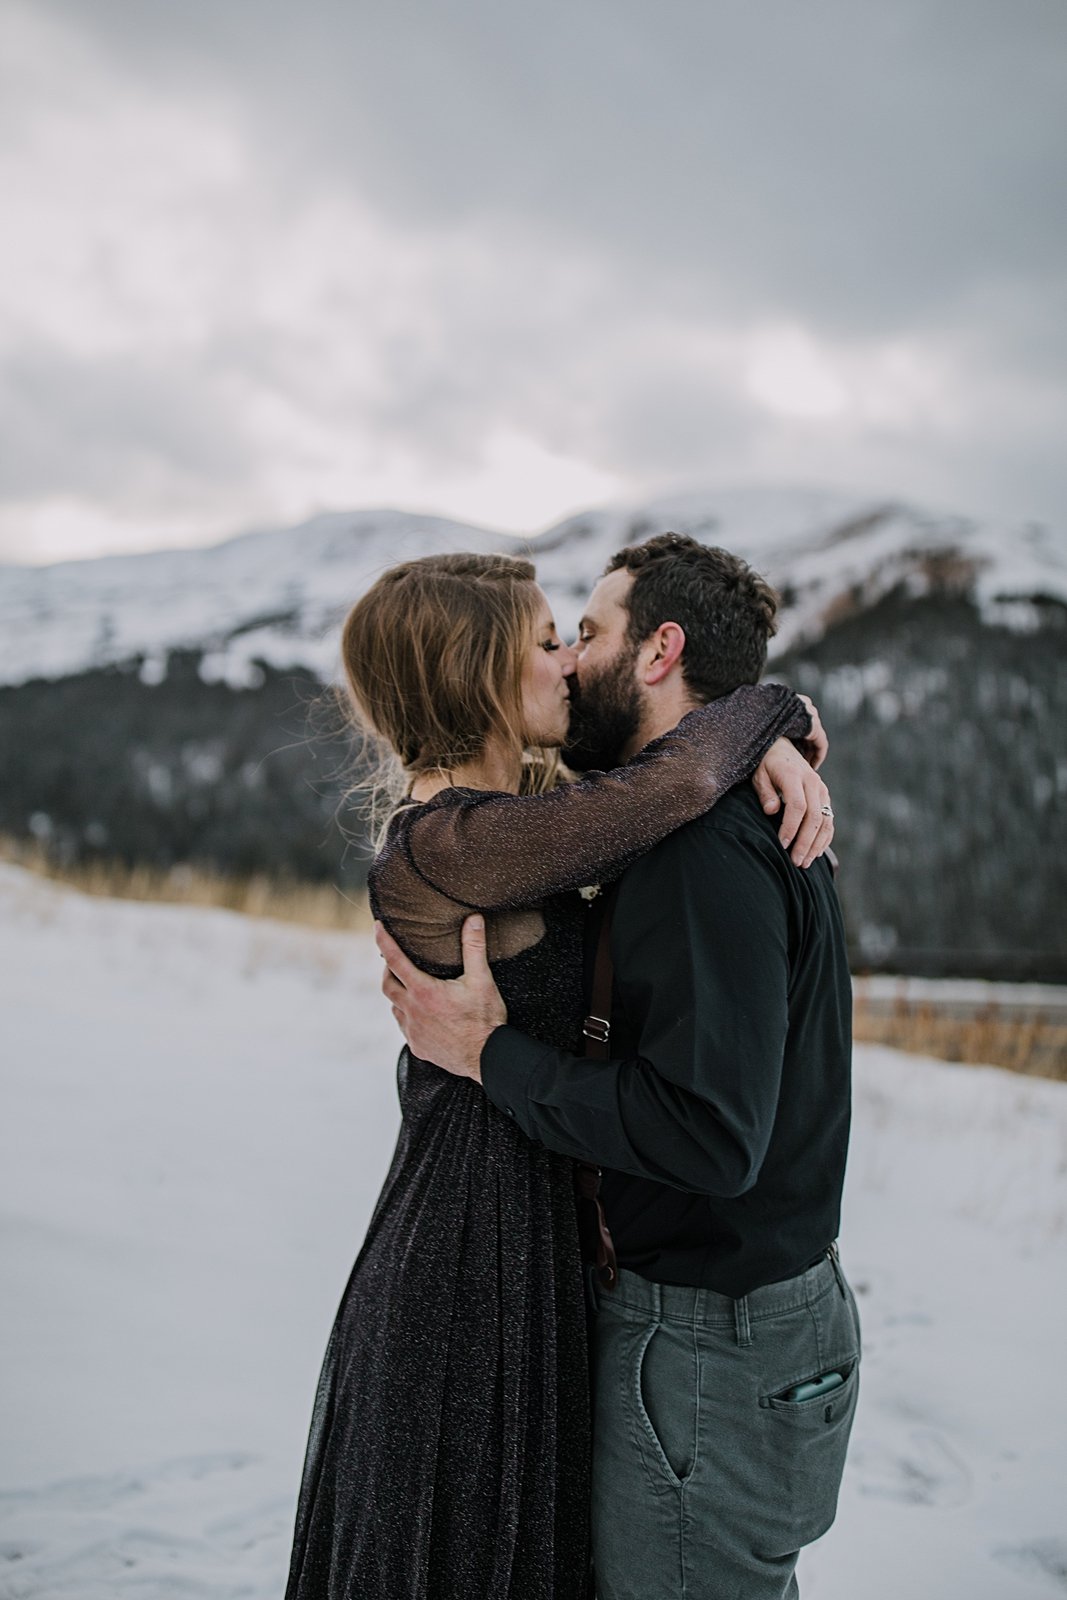 bride and groom holding one another close and kissing, continental divide elopement, continental divide wedding, celestial elopement, celestial wedding, snowy mountain peak wedding backdrop